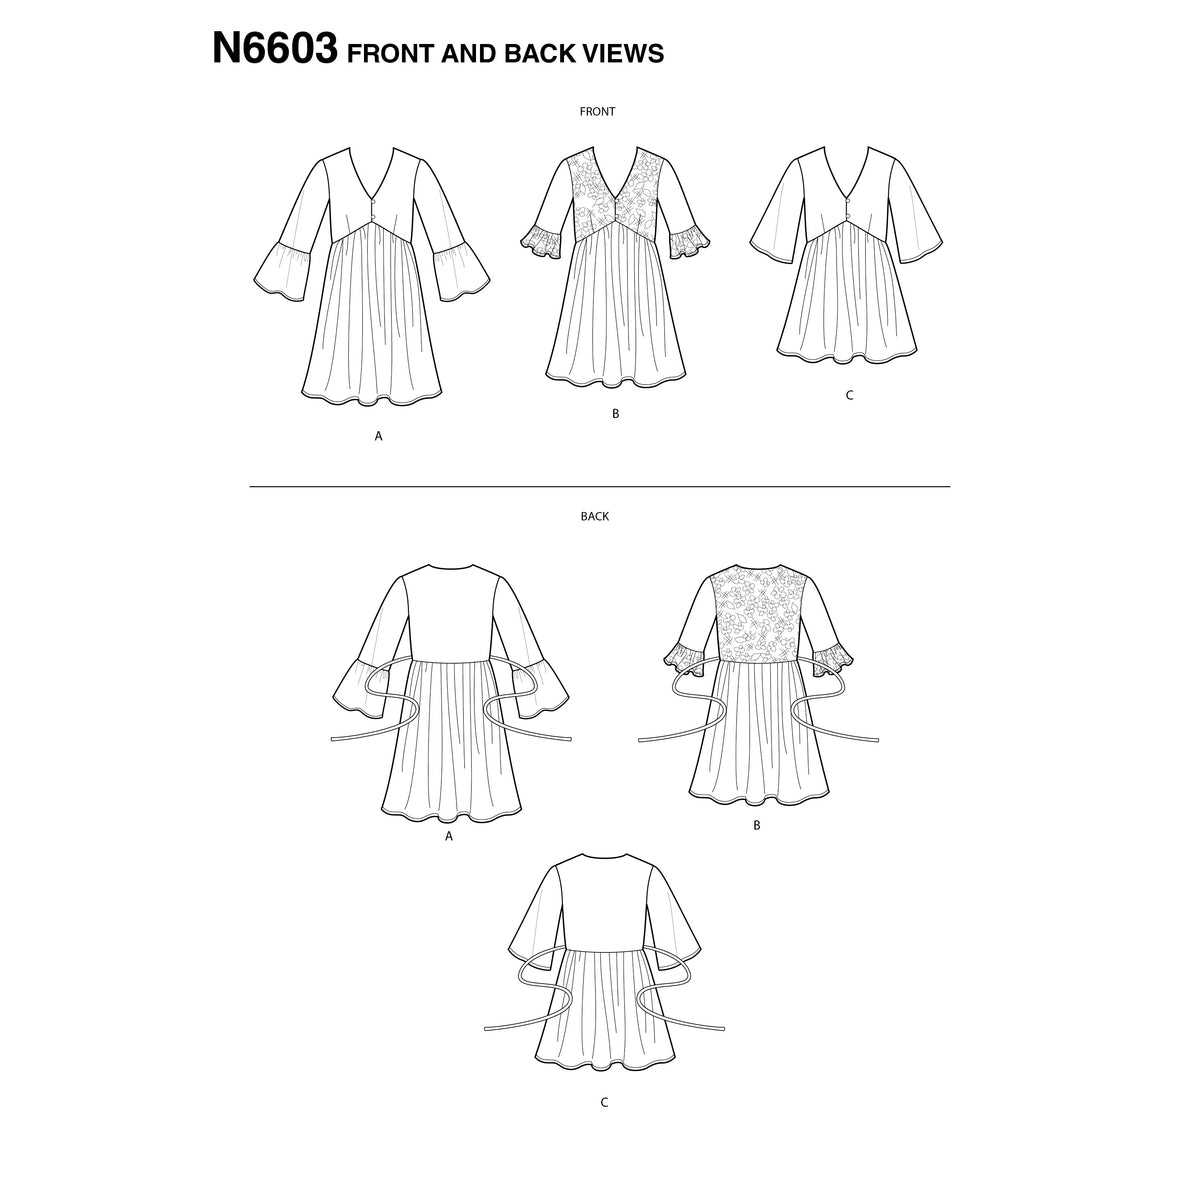 6603 New Look Sewing Pattern N6603 Misses' Mini Dress, Tunic and Top